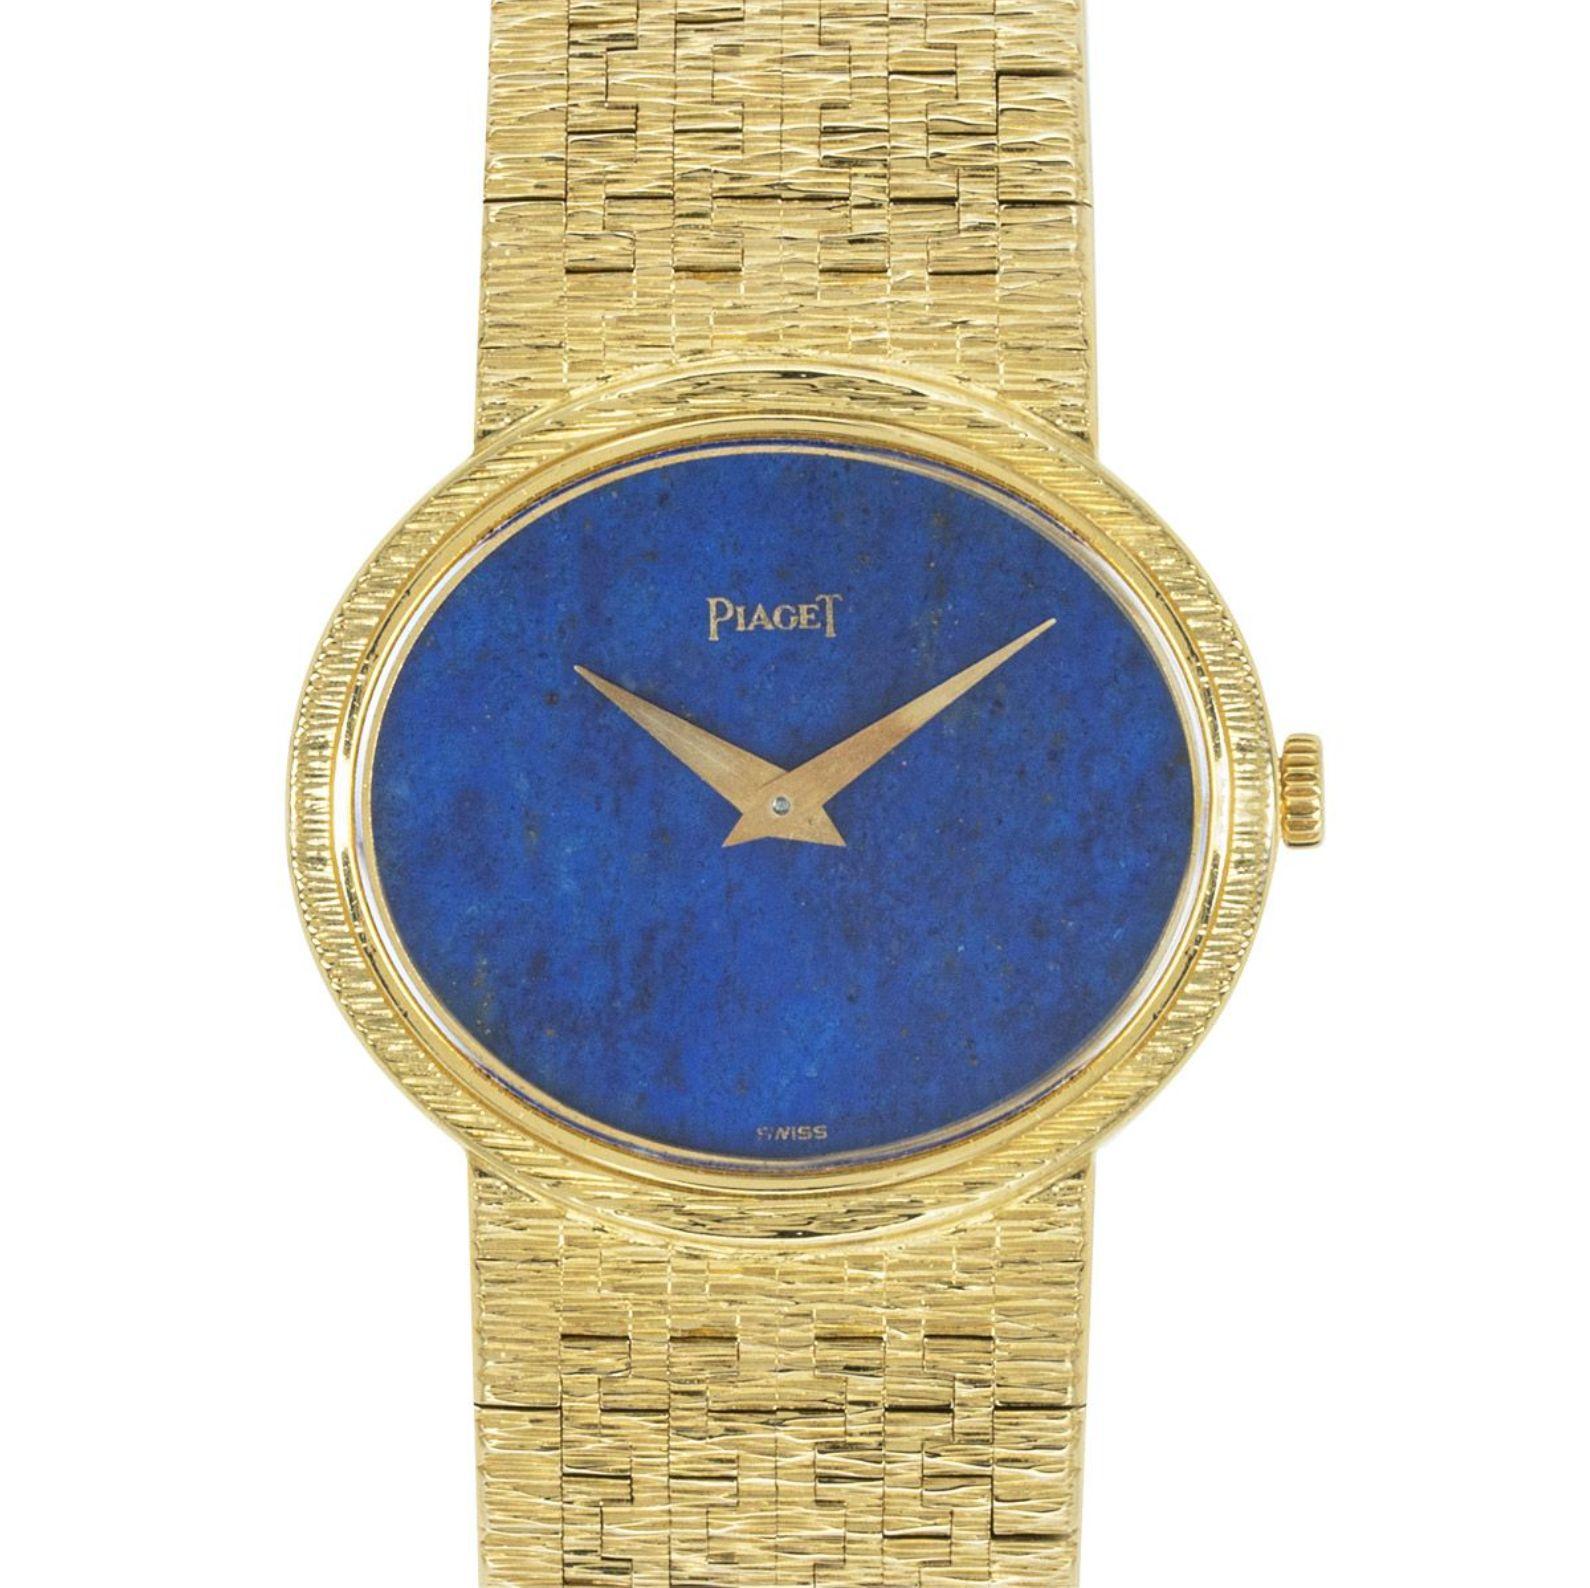 A 26 mm 18k Yellow Gold Ladies Dress Wristwatch, lapis lazuli dial, a fixed 18k yellow gold bezel, an 18k yellow gold jewellery style bracelet with an 18k yellow gold jewellery style clasp, sapphire glass, manual wind movement, in excellent